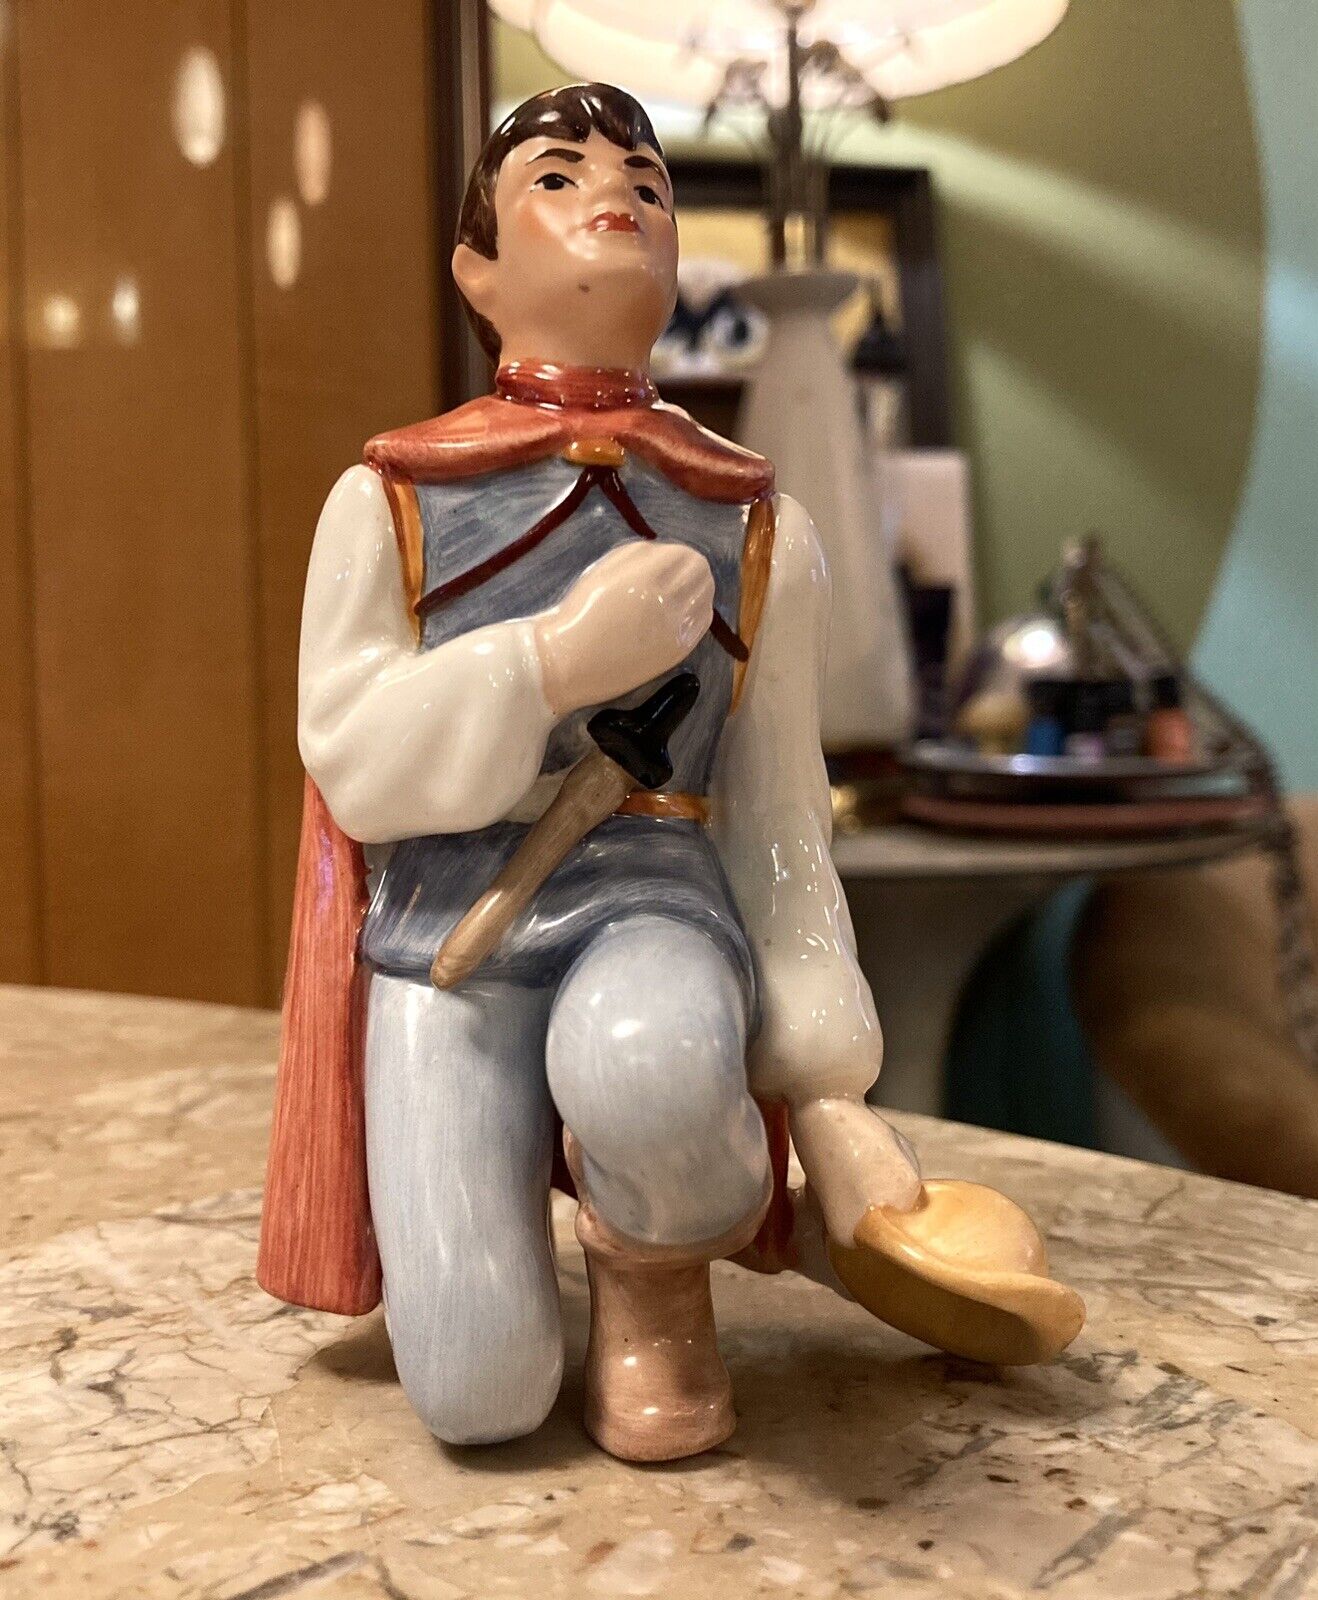 GOEBEL PRINCE CHARMING from SNOW WHITE PORCELAIN CERAMIC 4